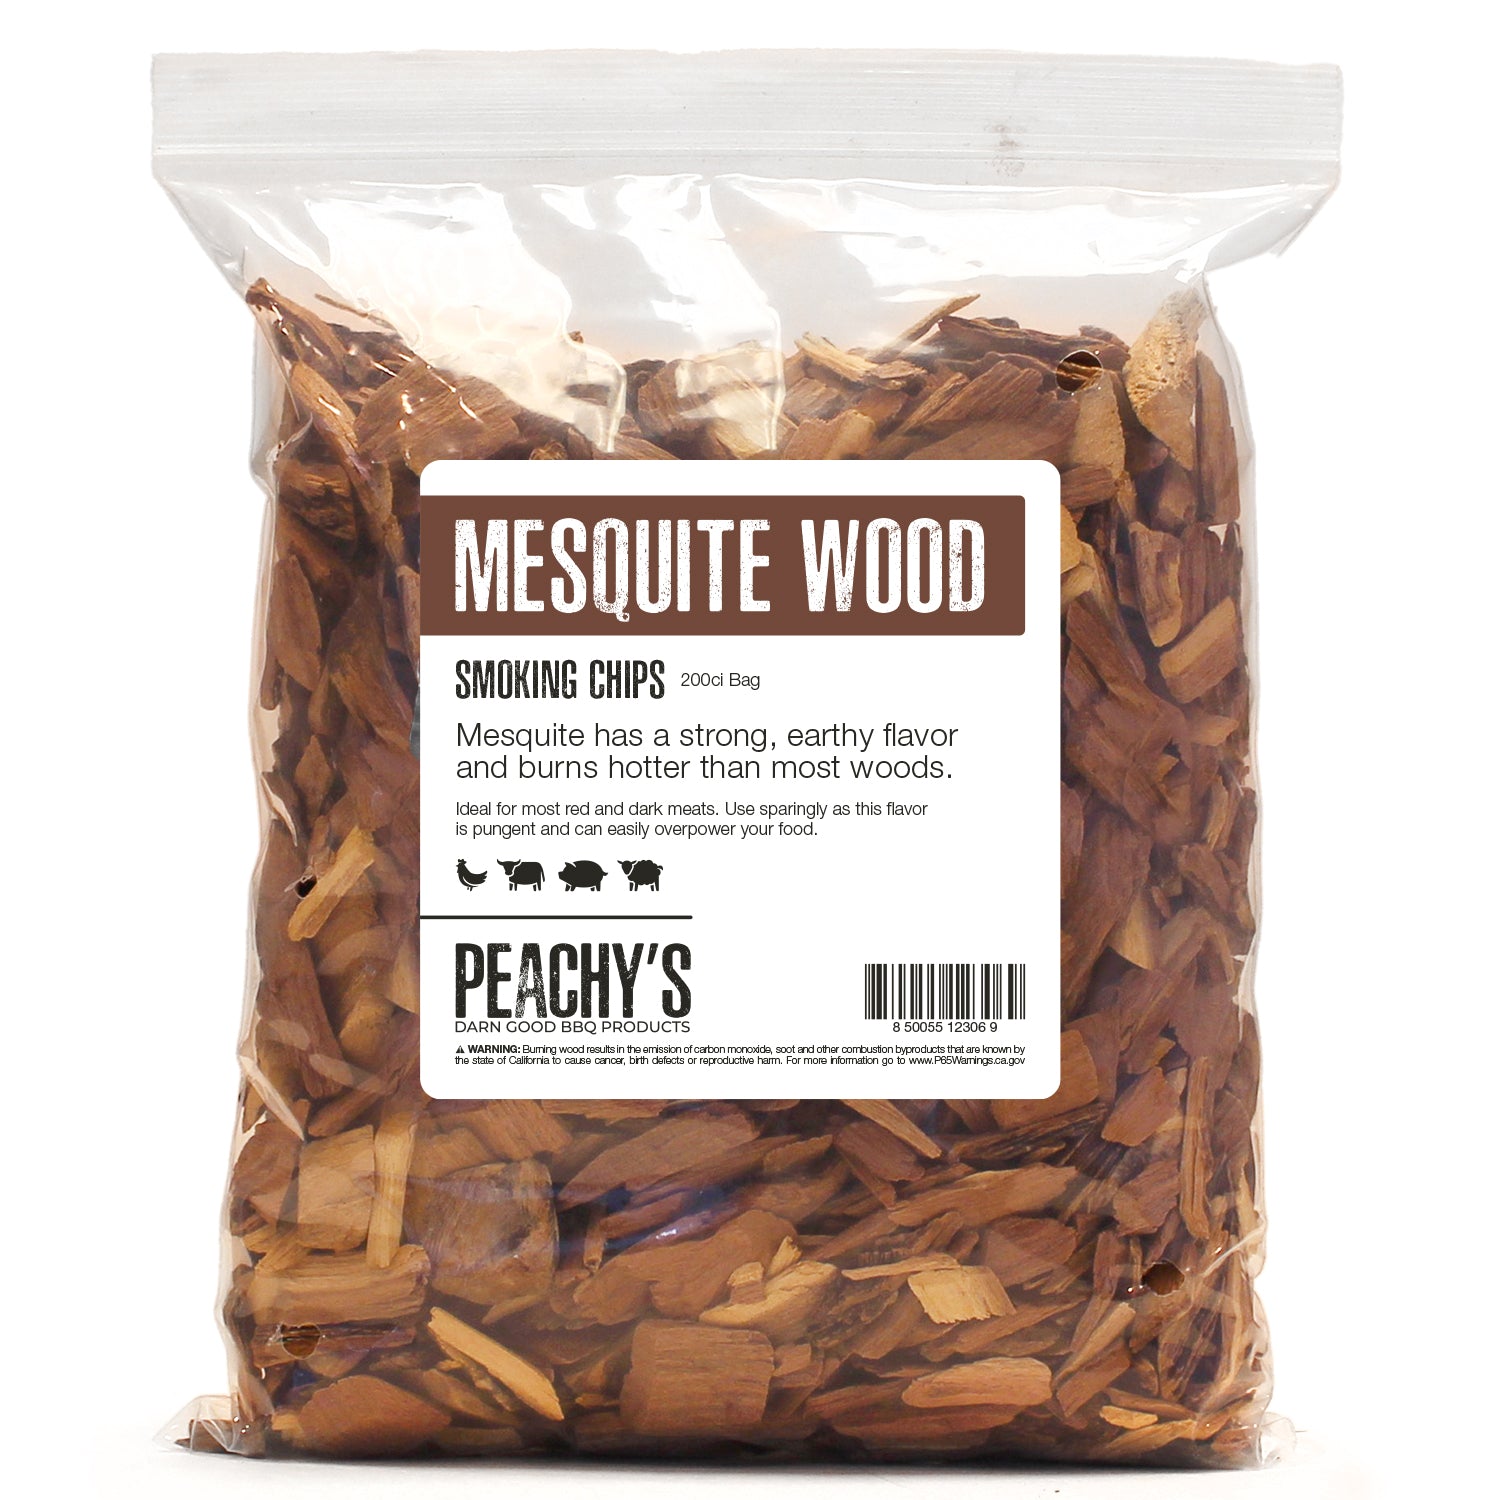 MESQUITE Chips | 200ci Bag of Premium Smoking Woods by PEACHY'S